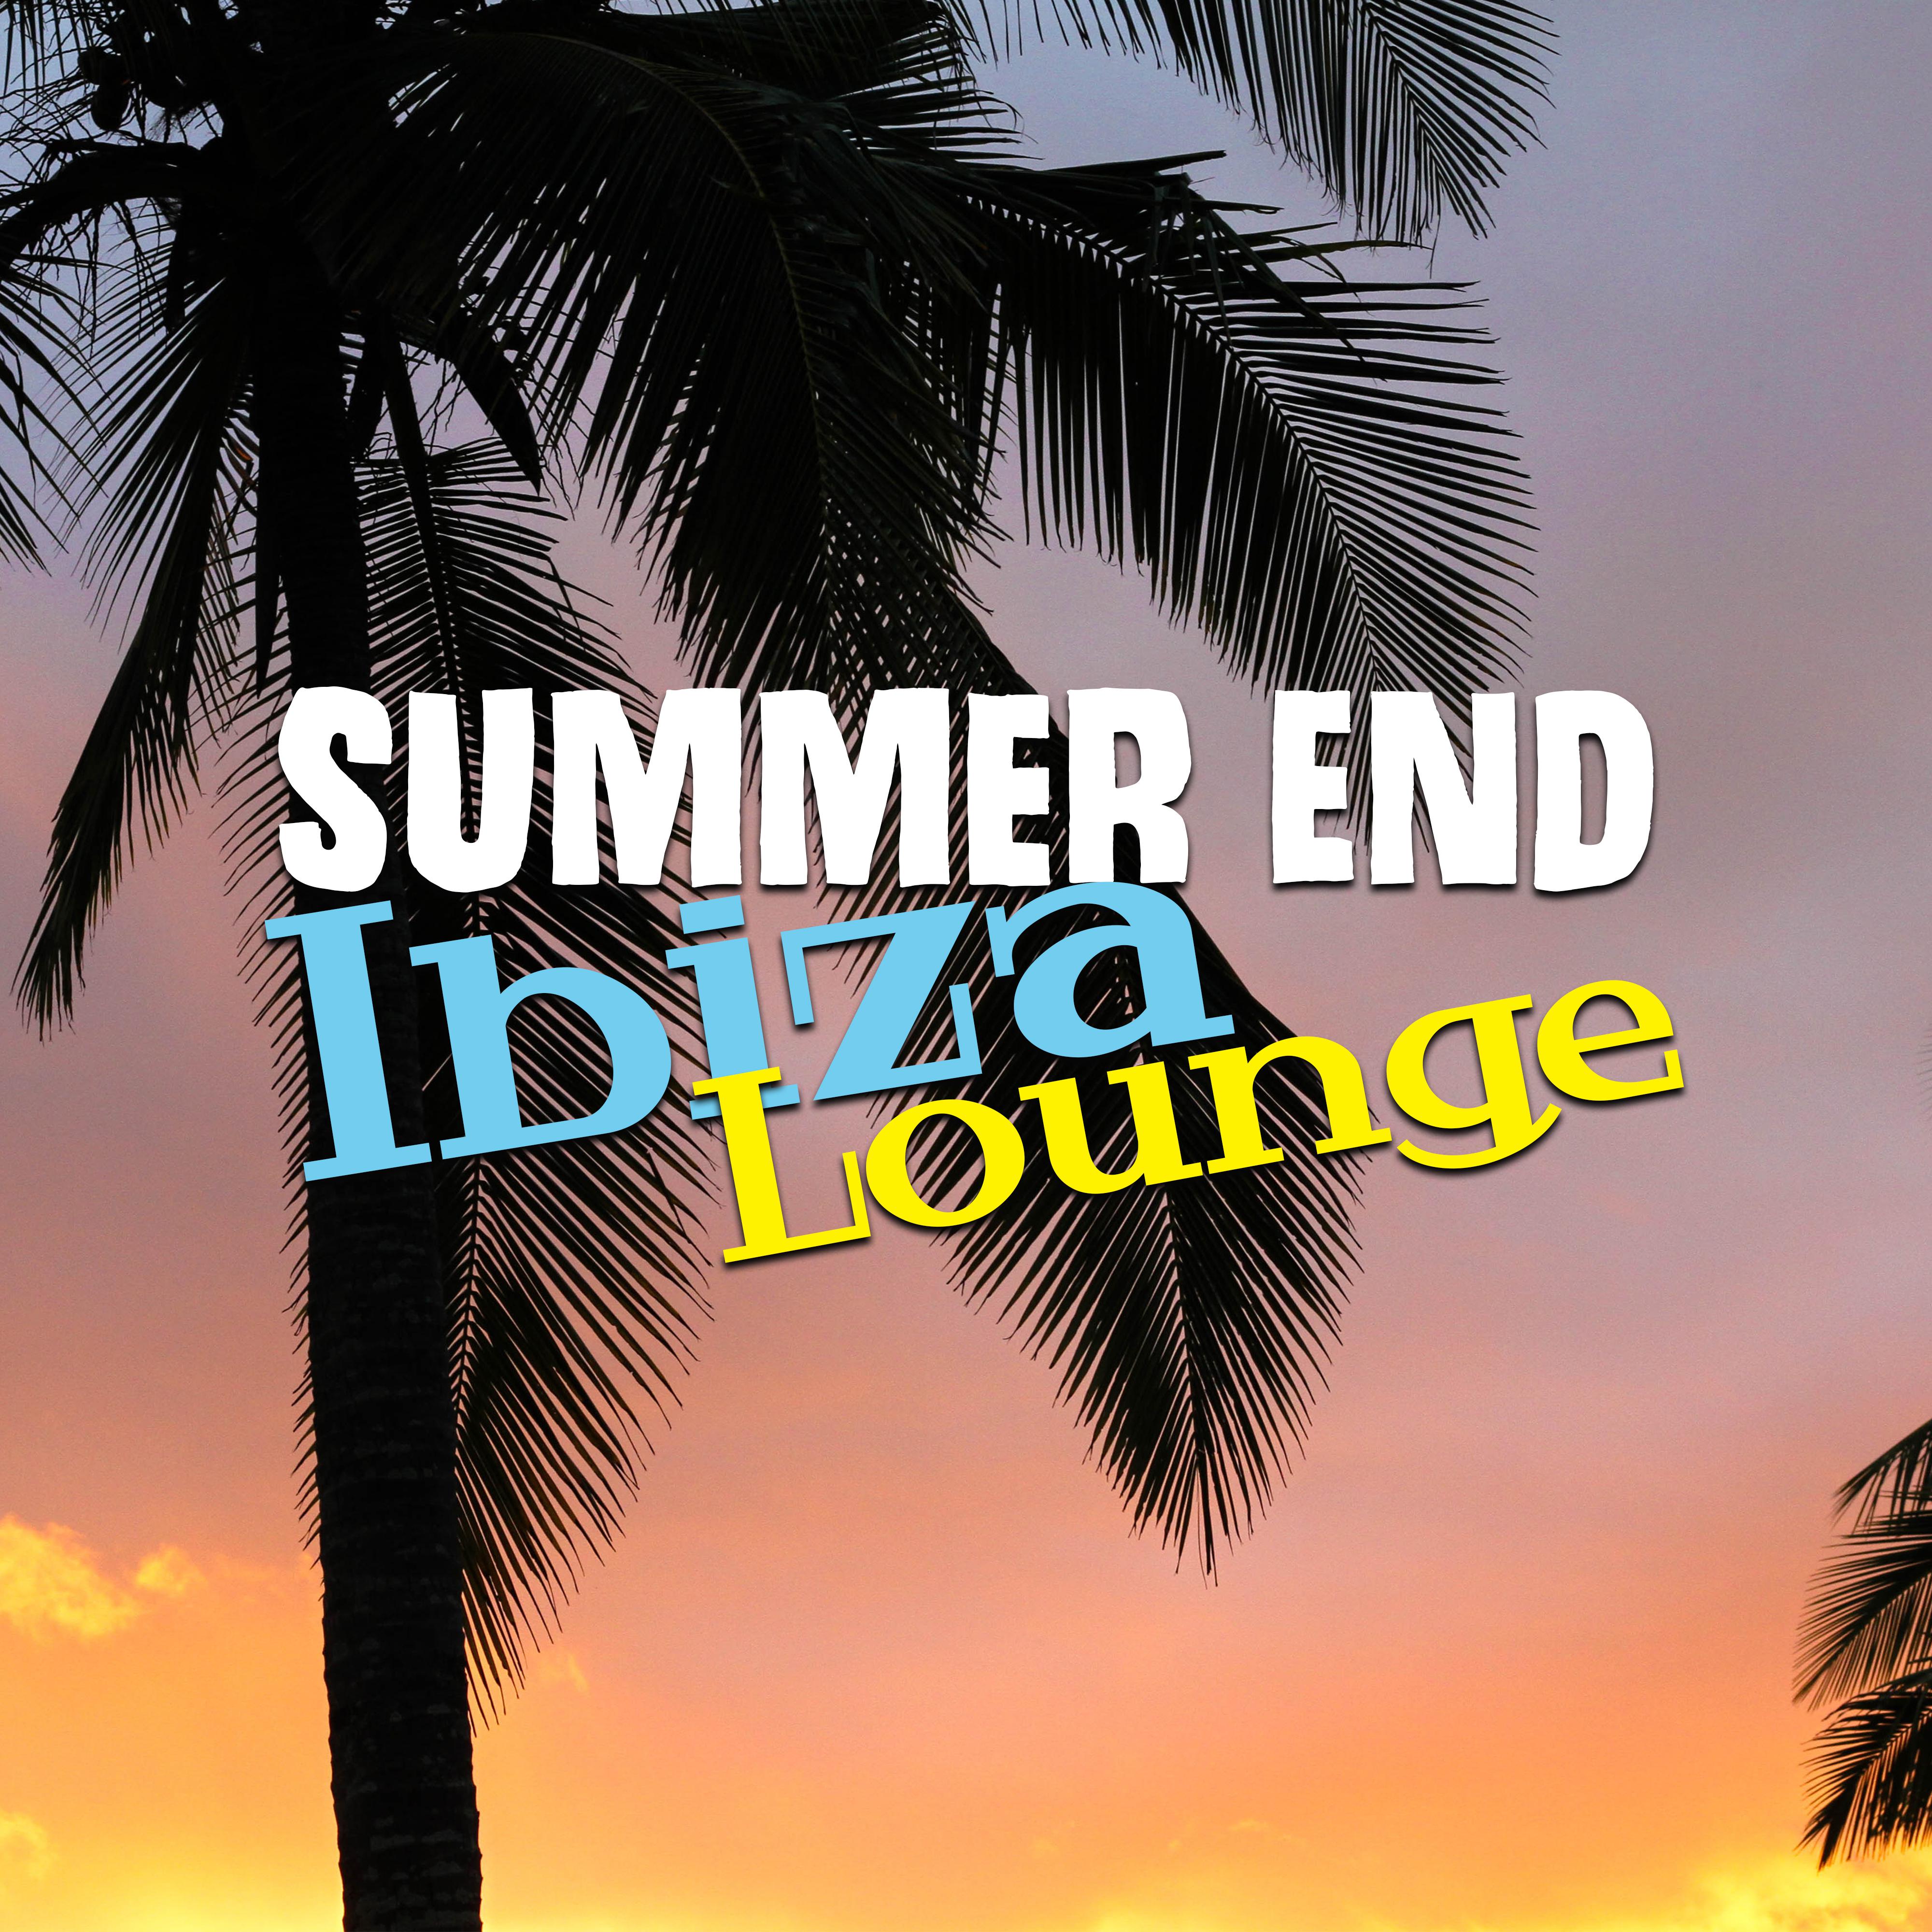 Summer End Ibiza Lounge  Chill Out Music, Relax  Chill, Ibiza Lounge, Party Hits